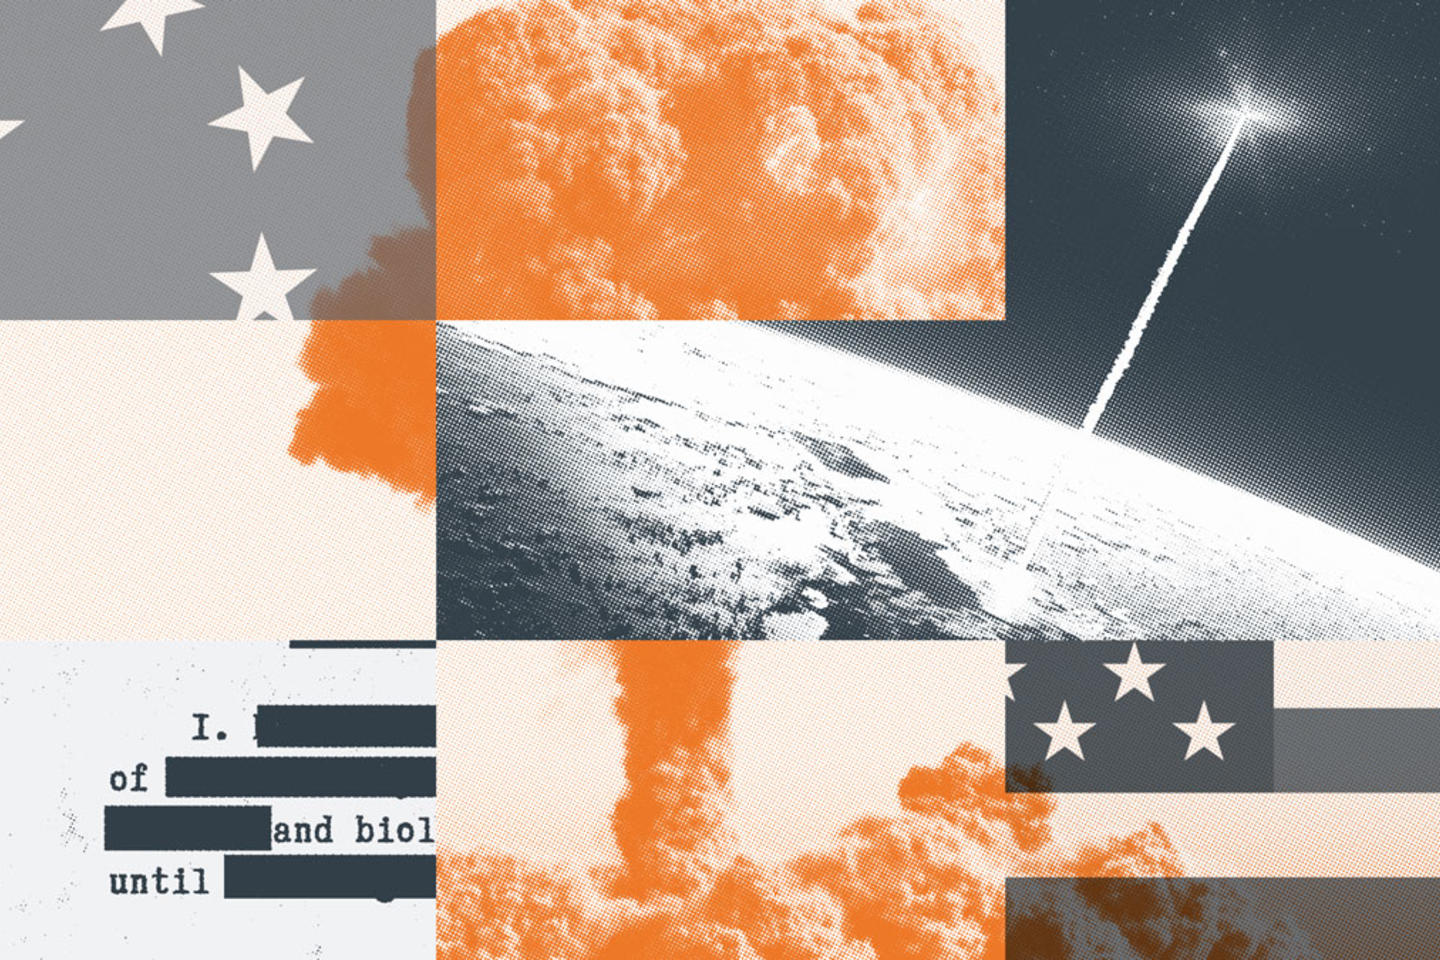 Images of a mushroom cloud and warhead in space interspersed with shots of the U.S. and Chinese flags.